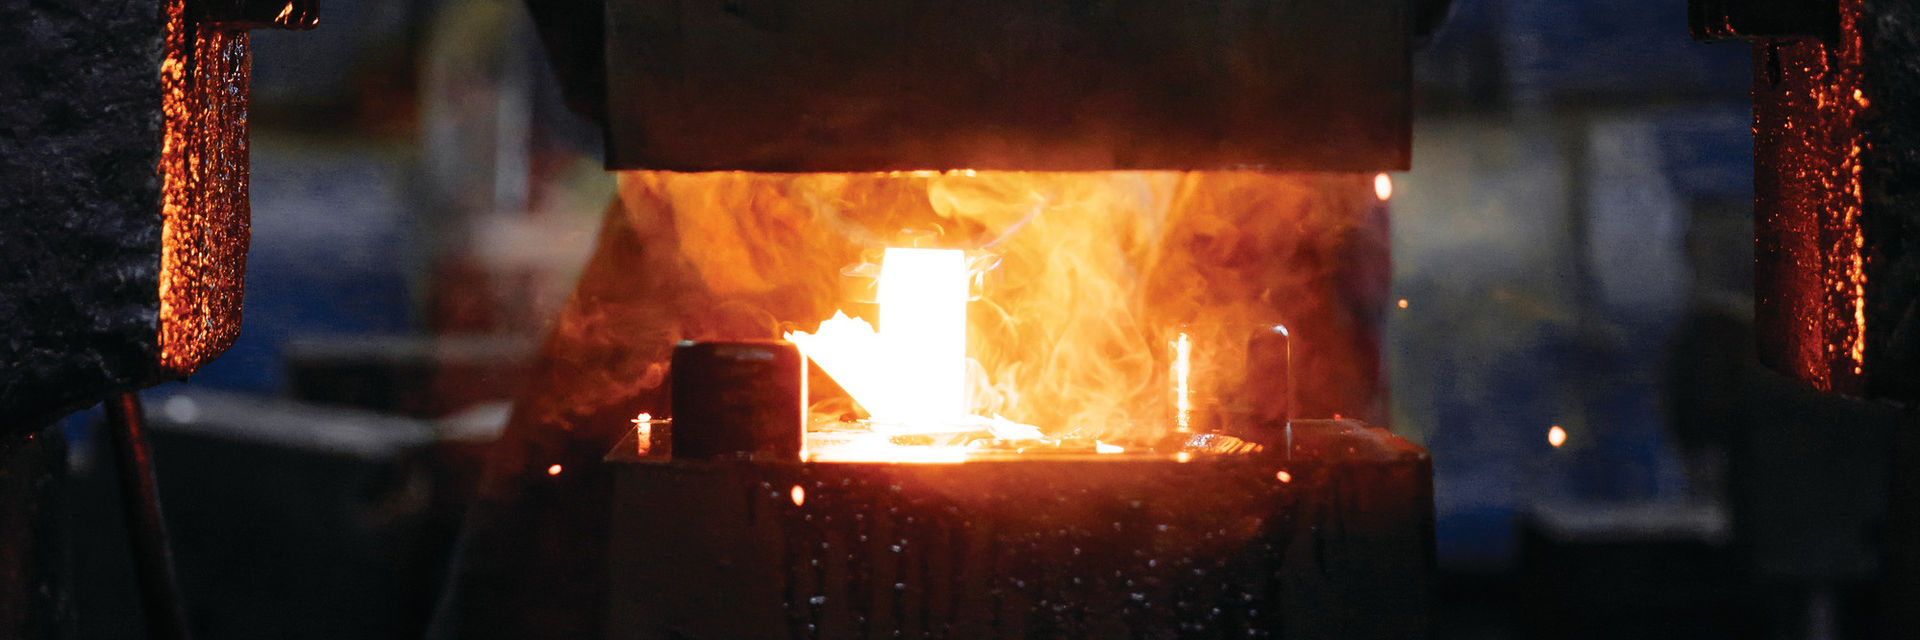 forge hydraulic hammer shapes the hot material